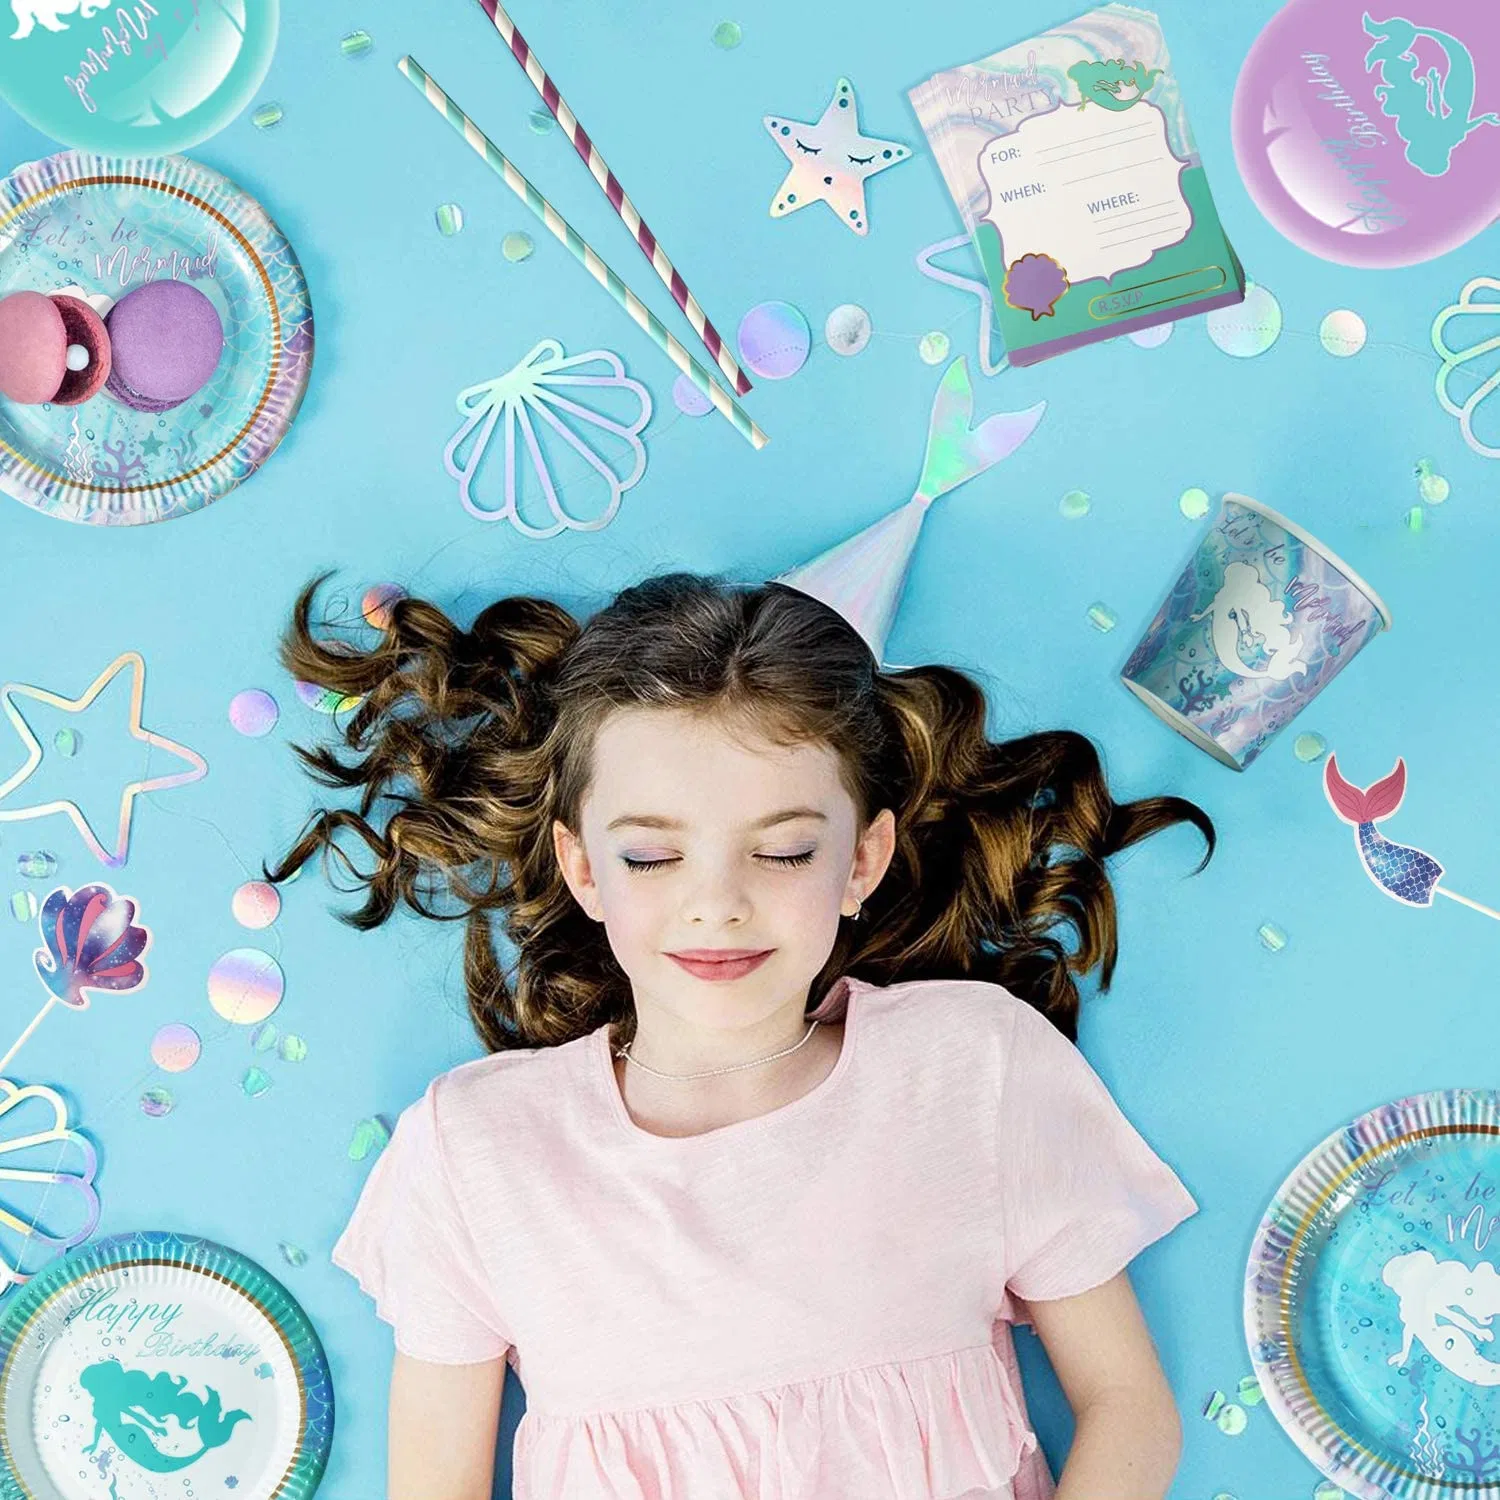 Naiwoxi Mermaid Birthday Party Decorations - Mermaid Party Supplies for Girl, Plates, Invitation Cards, Banner, Table Cover, Toppers, Straws, Cutlery, Balloons,